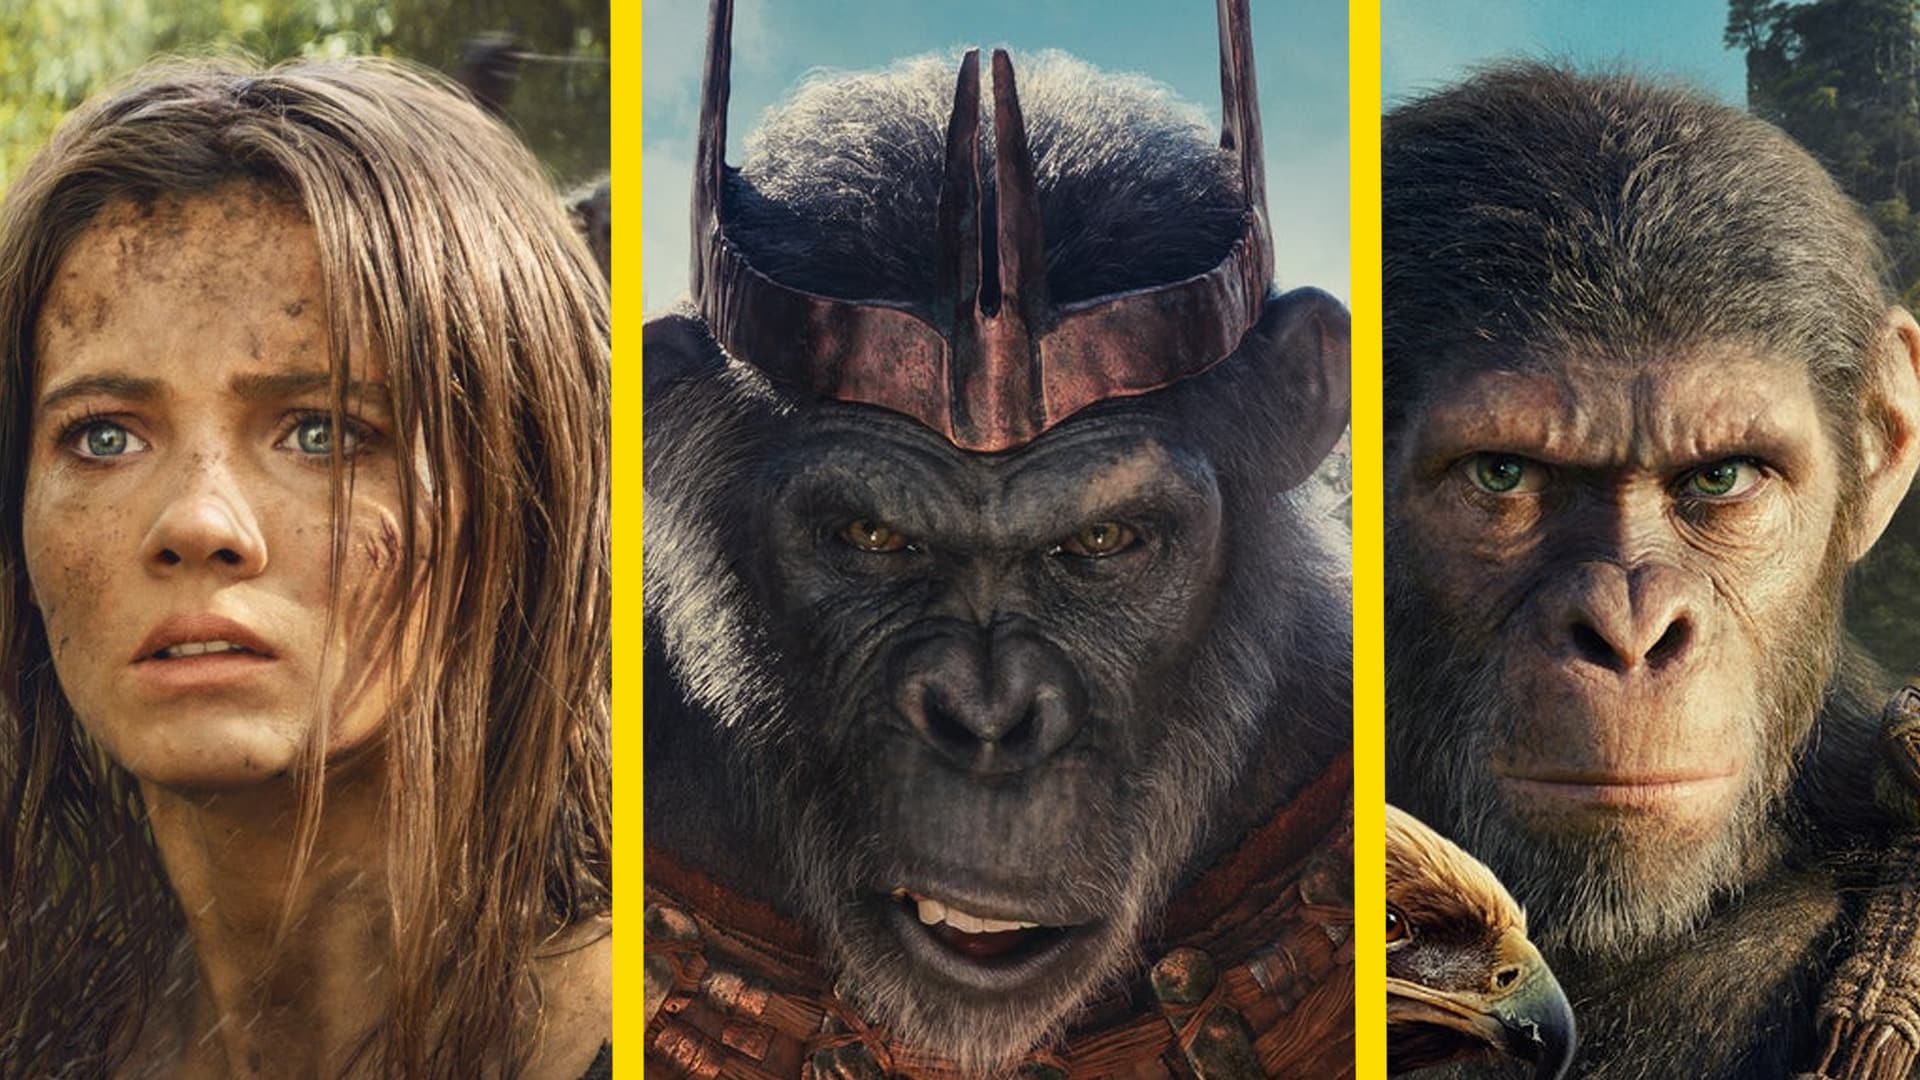 Kingdom of the Planet of the Apes Movie Review